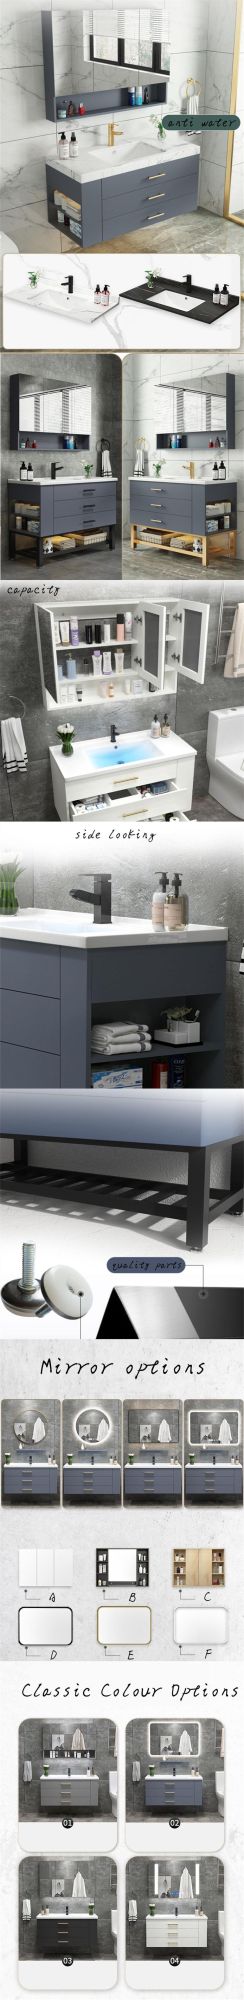 Modern Simple Low Prices Wall Mounted Bathroom Vanity Cabinet with Glass Mirror